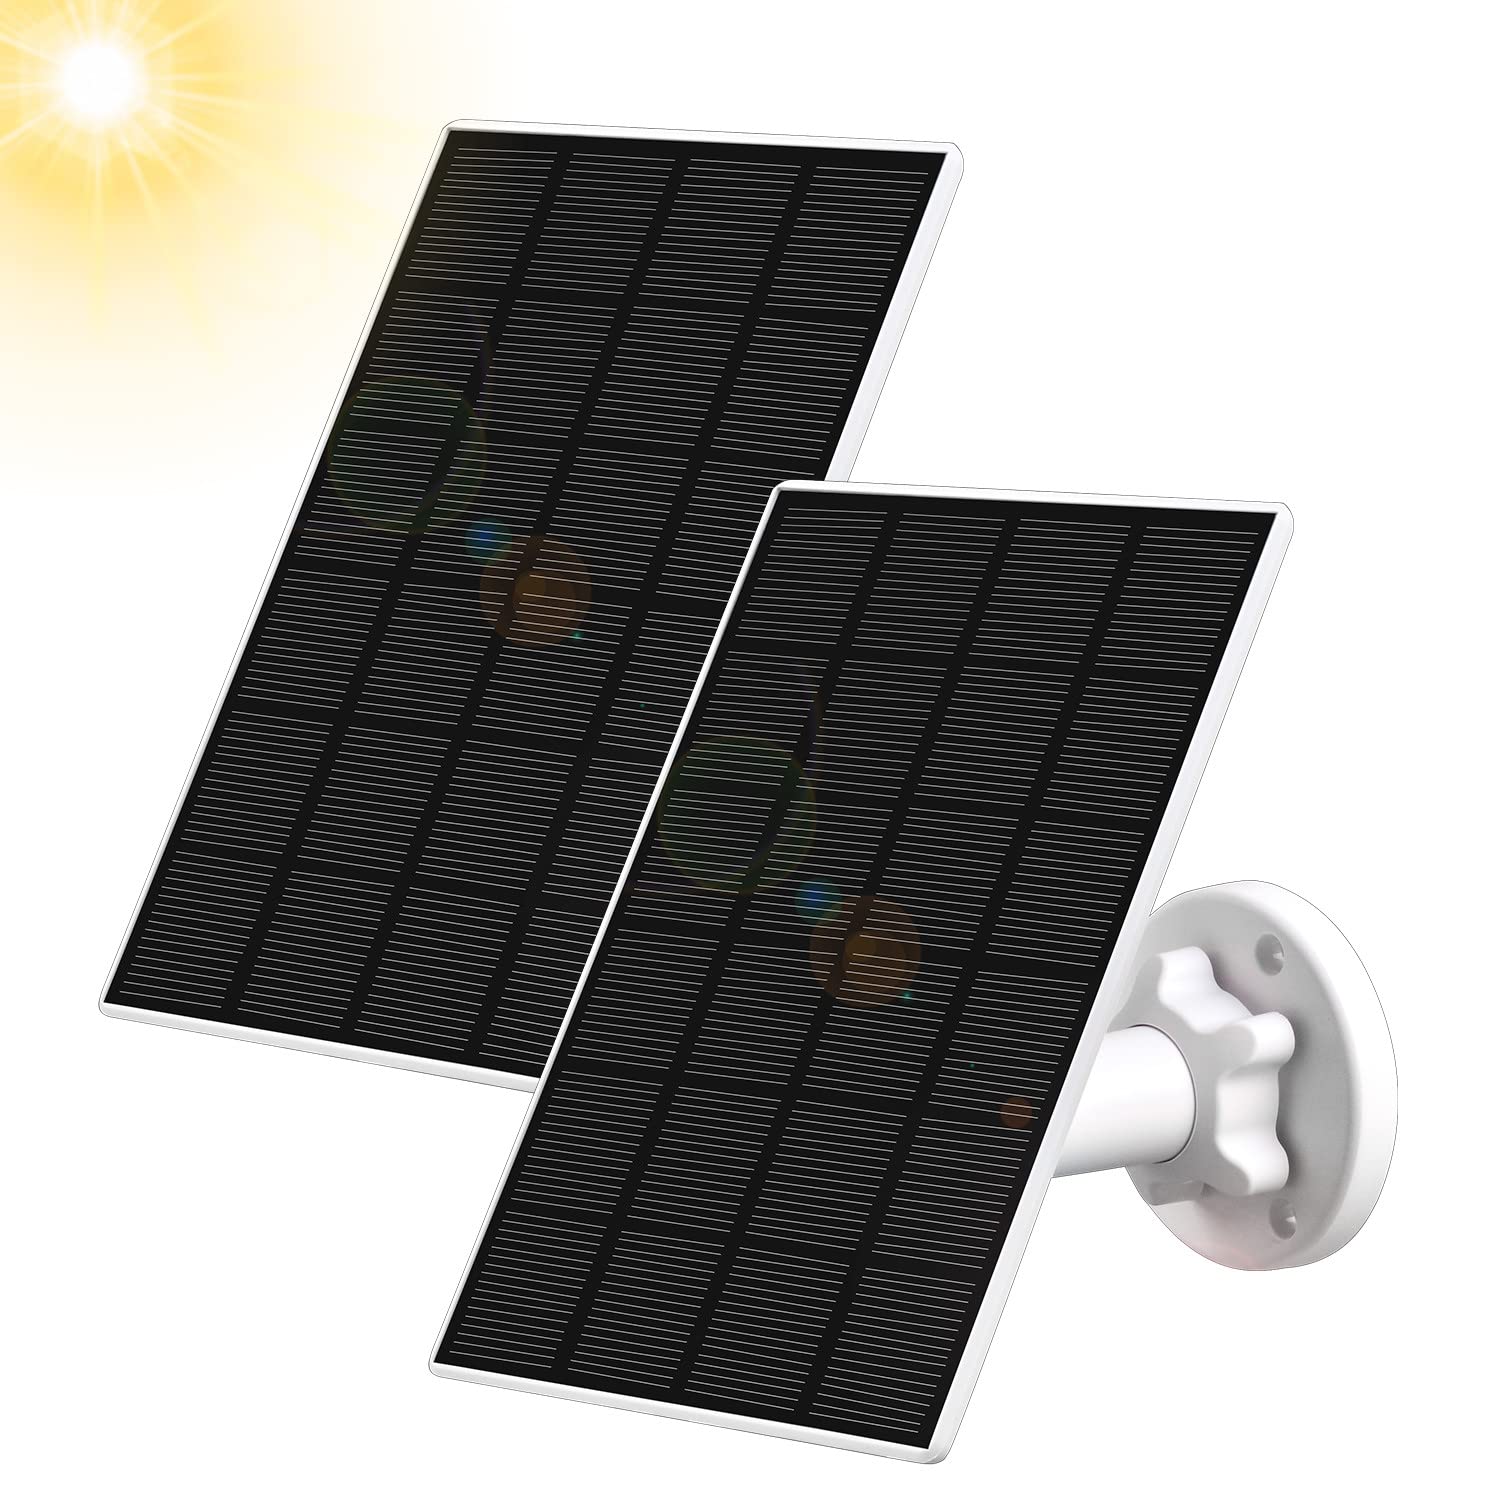 Solar Panel Compatible with Wyze Cam Outdoor,Continuous Power Supply for Rechargeable Battery Camera,5V 3.5W USB Port Waterproof Solar Panel with 10ft Charging Cable（2 Pack）